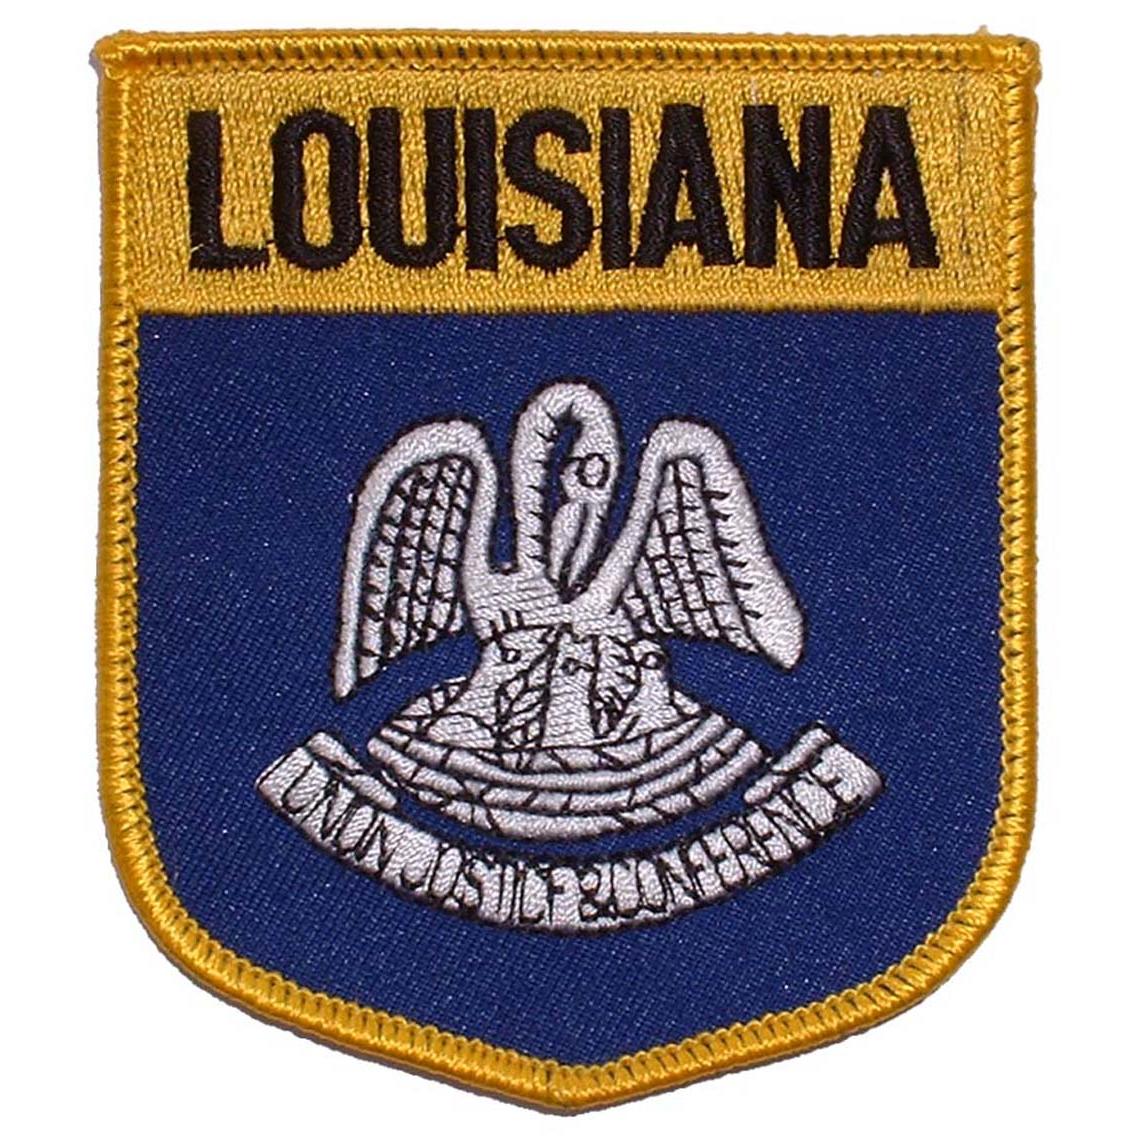 Findingking Louisiana State Flag Shield Patch 2 7/8" x 3 1/2"